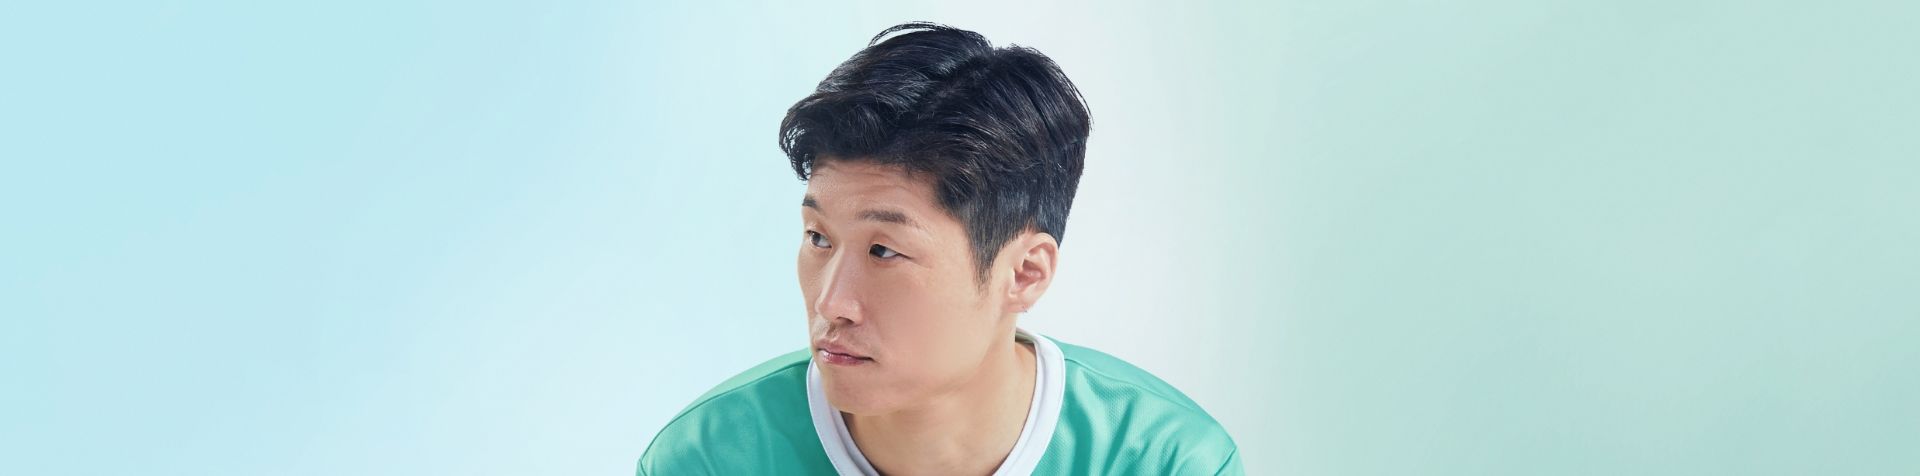 A portrait of male football player and Team Century member Jisung Park looking to his right in front of a blue and green background.